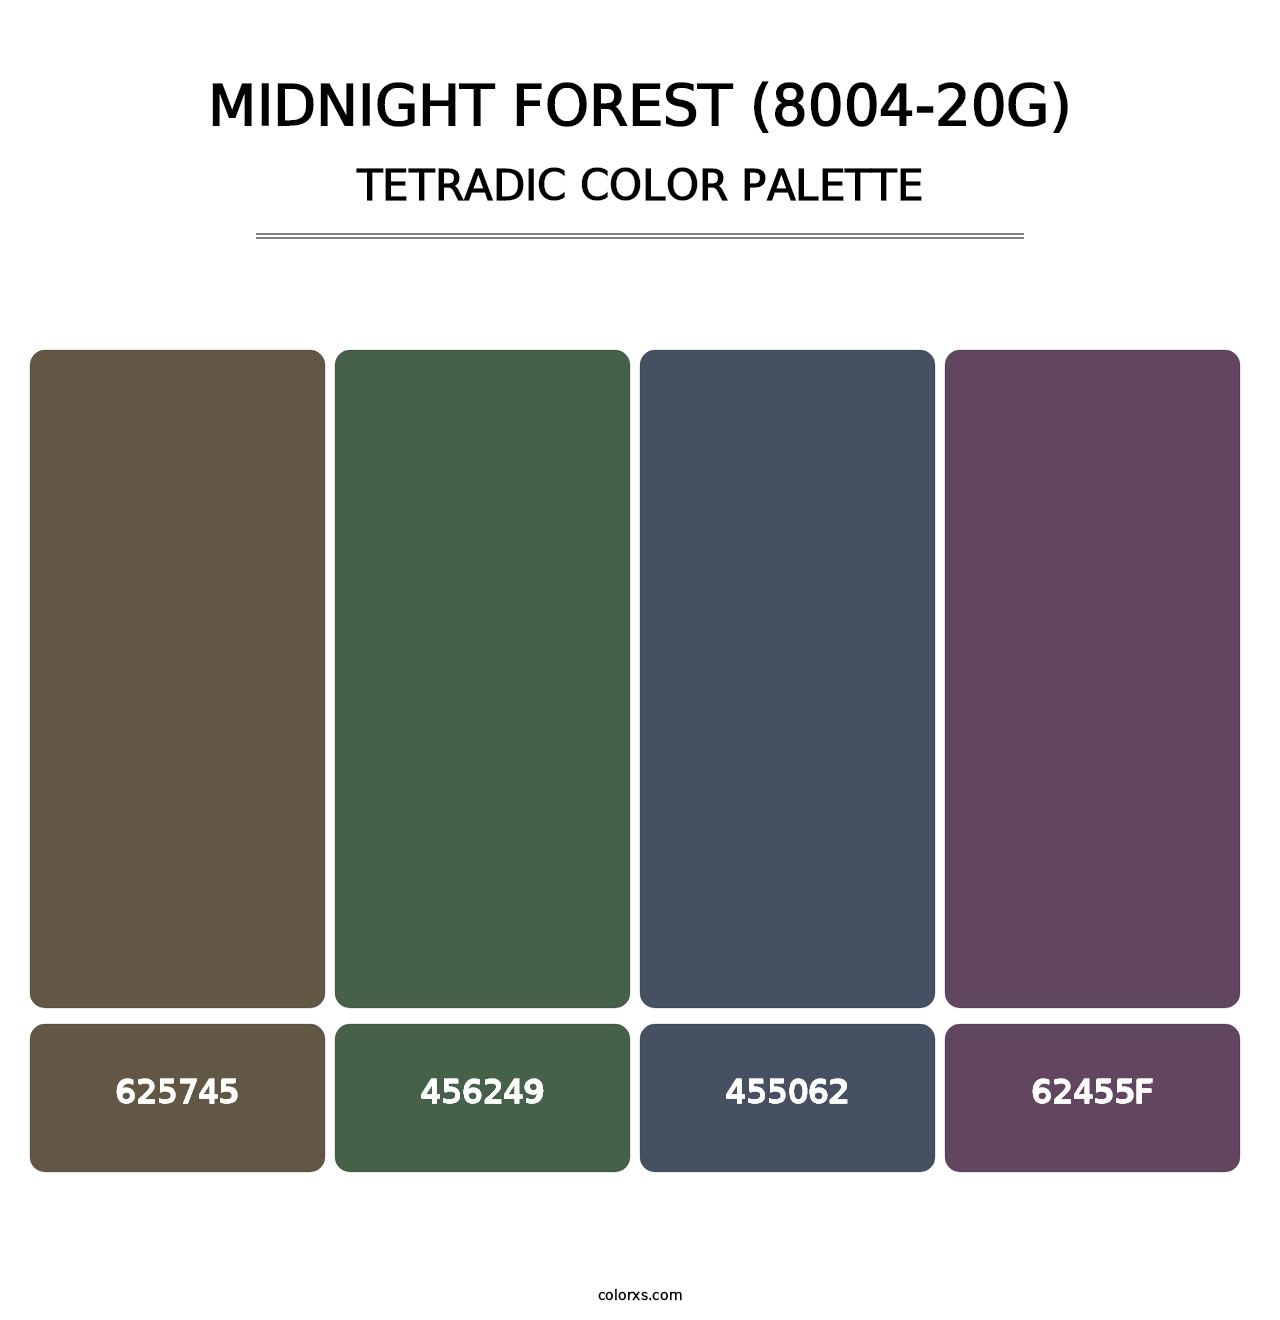 Midnight Forest (8004-20G) - Tetradic Color Palette